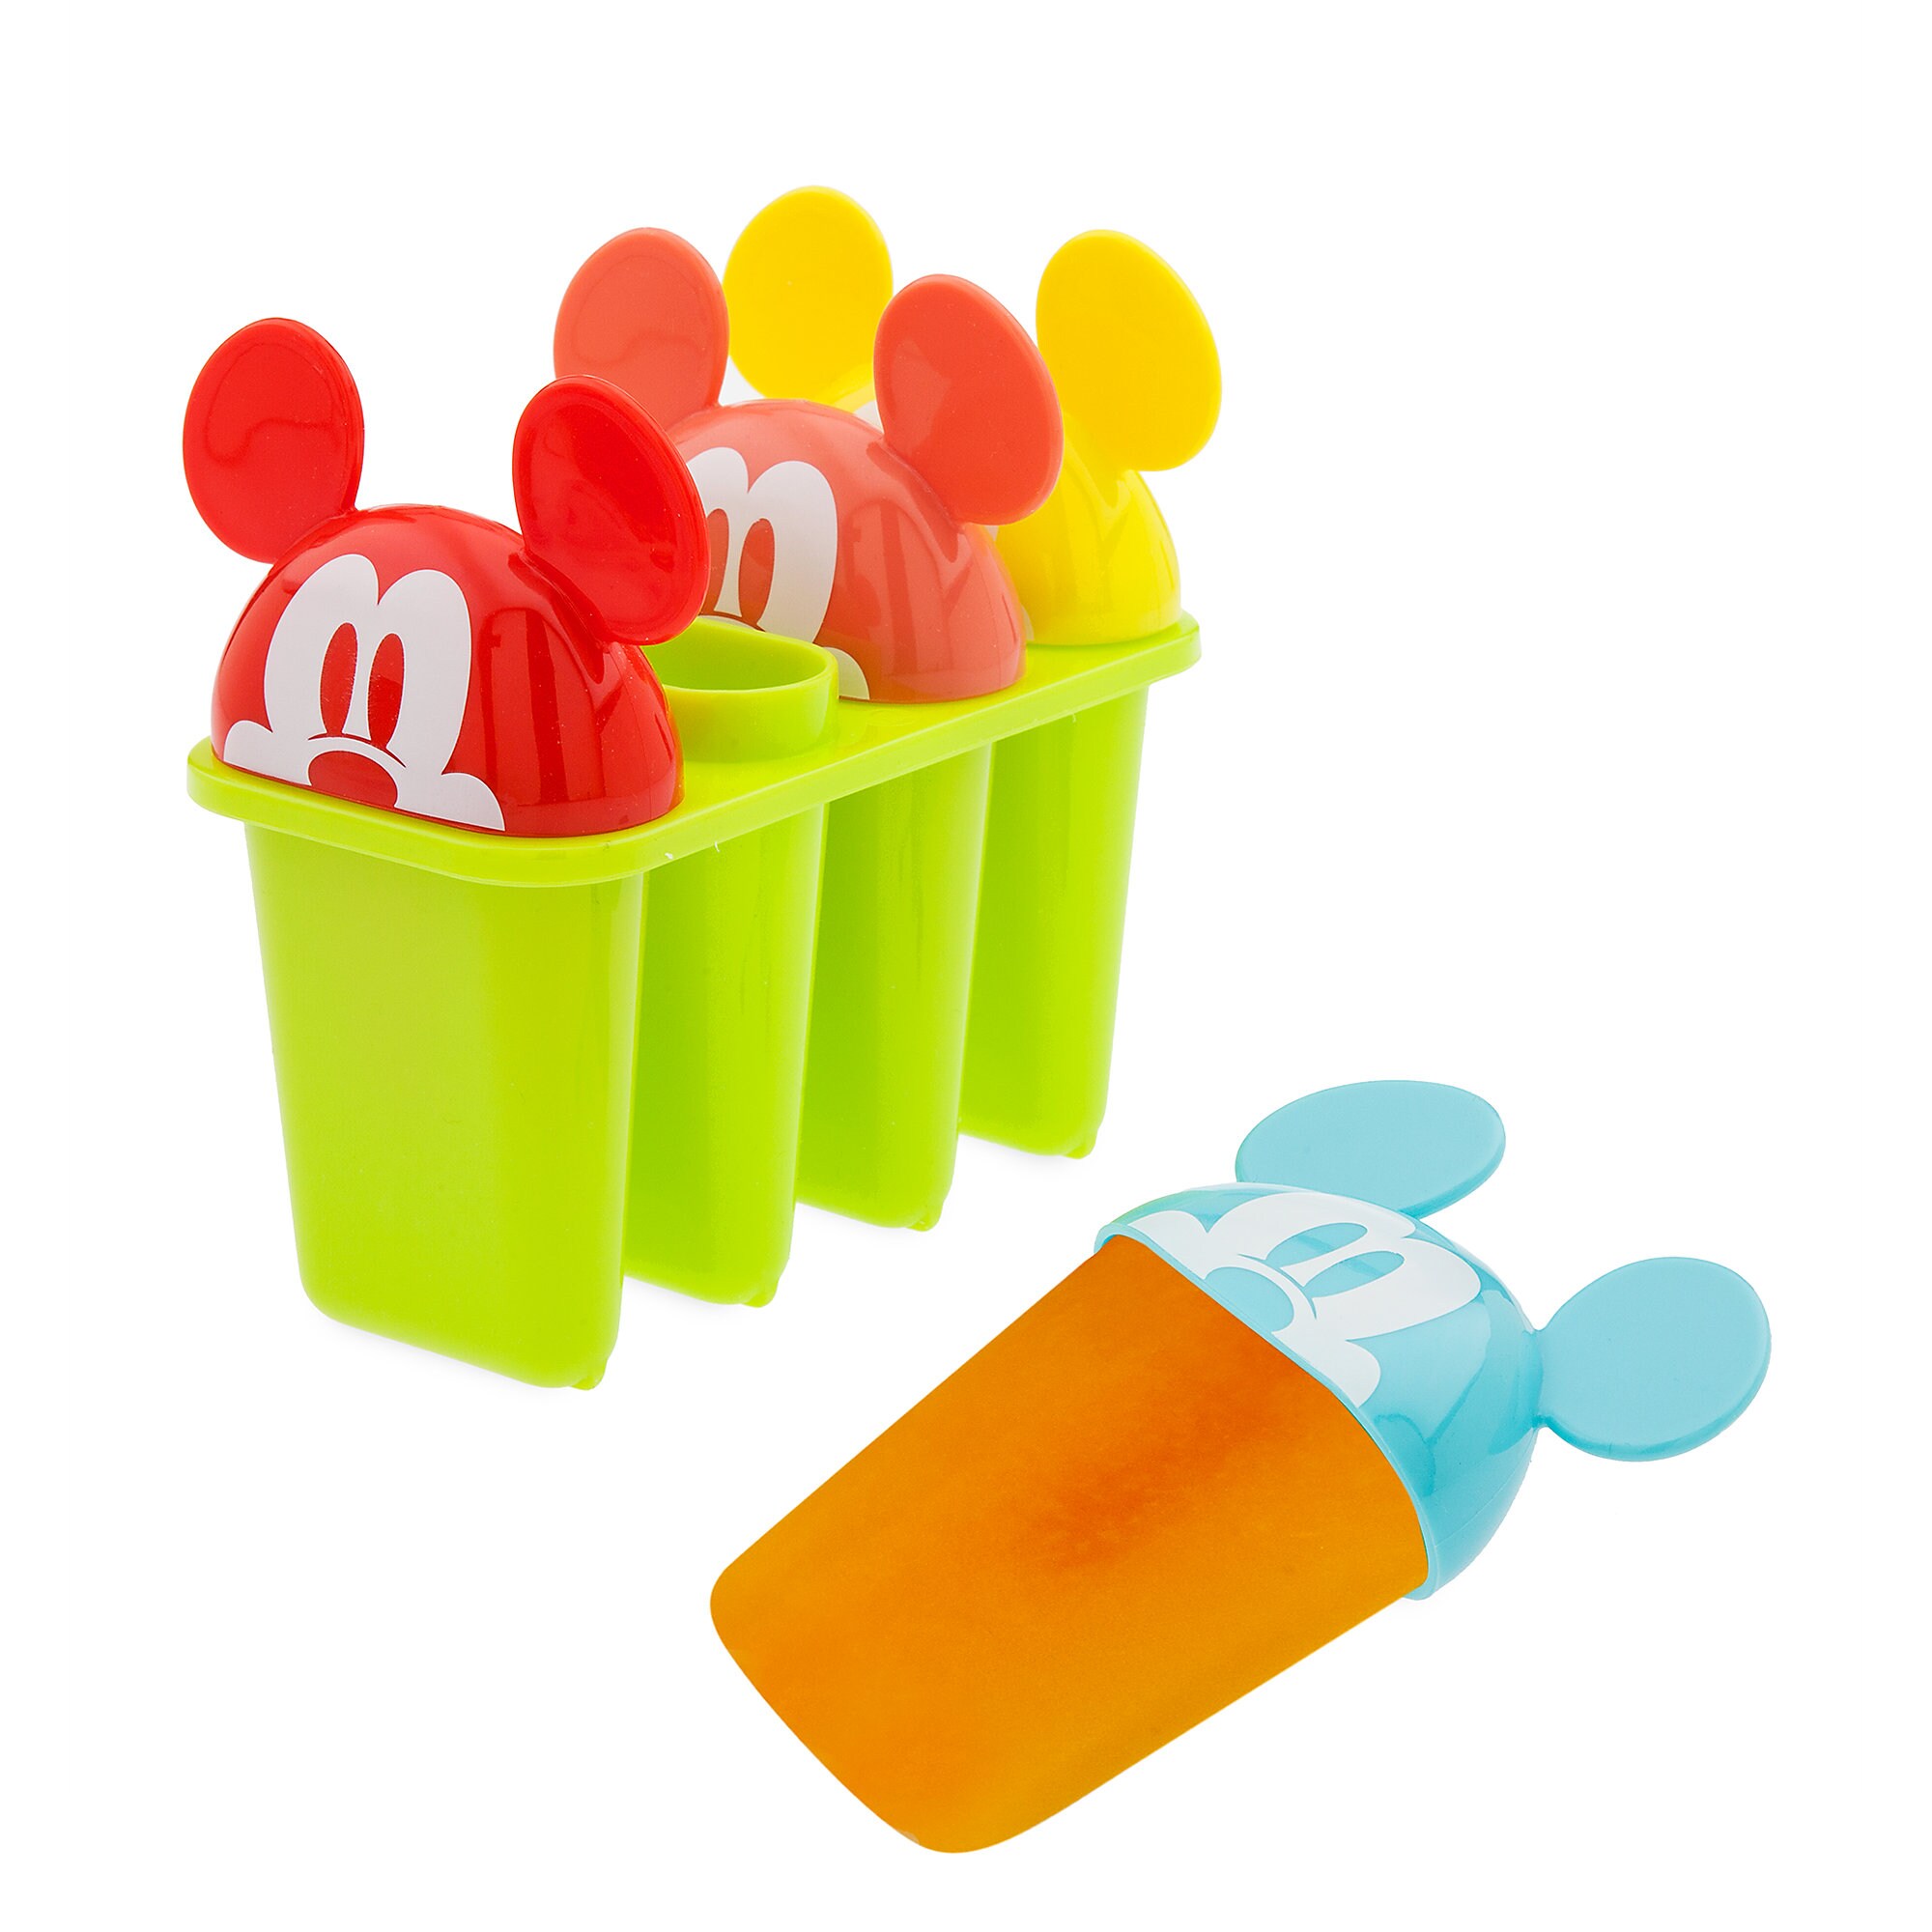 Mickey Mouse Popsicle Molds - Disney Eats